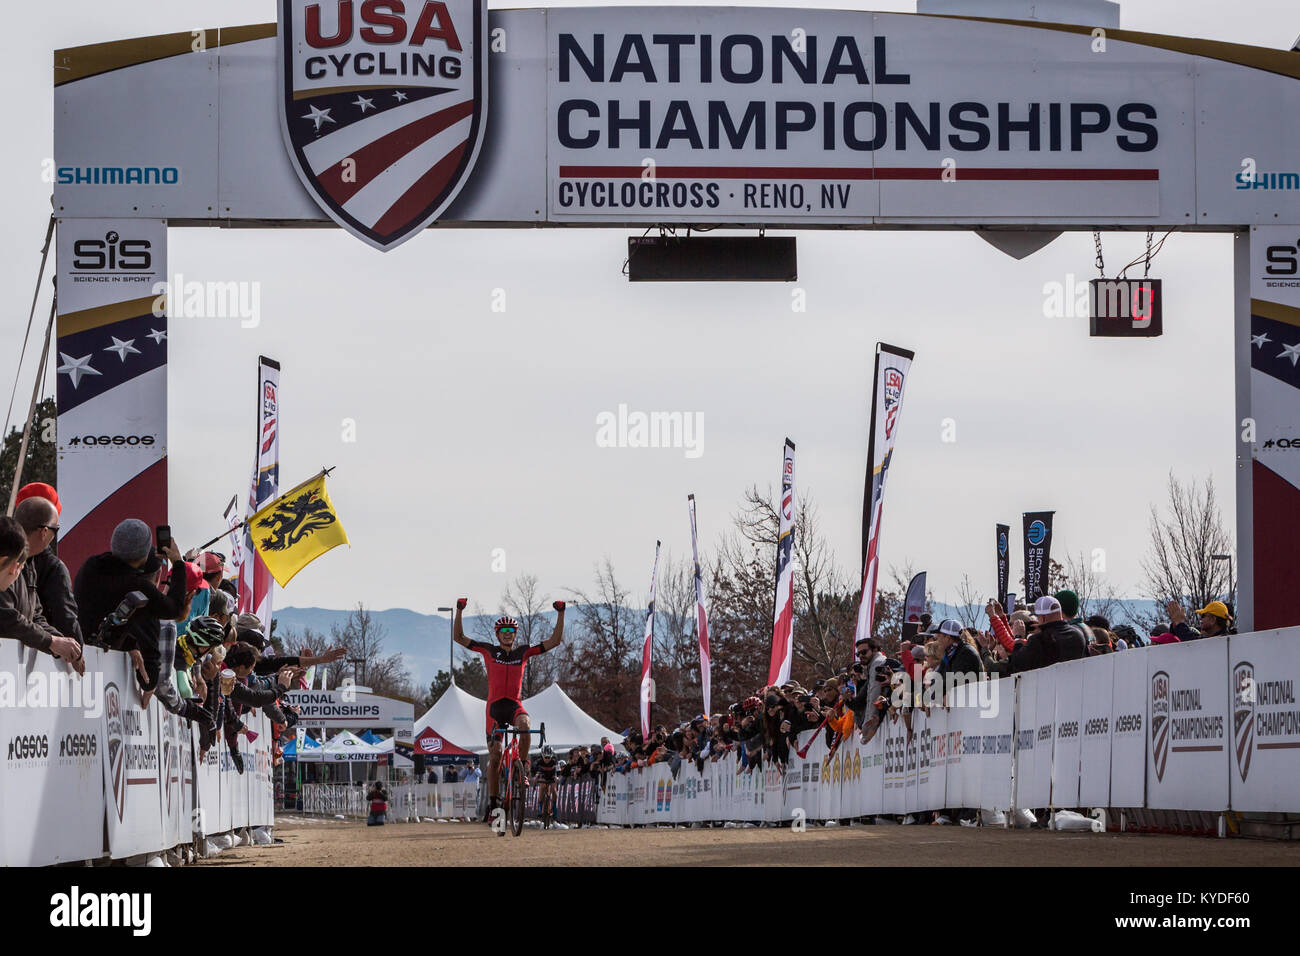 Reno, Nevada, USA. 14th Jan, 2018. CHRISTOPHER BLEVINS celebrates his U23 USA Cycling Cyclocross National Championships at Rancho San Rafael Park in Reno, Nevada, on Sunday, January 14, 2018. Blevins won with a time of 52:38, six seconds in front of second place racer, Eric Brunner. Credit: Tracy Barbutes/ZUMA Wire/Alamy Live News Stock Photo